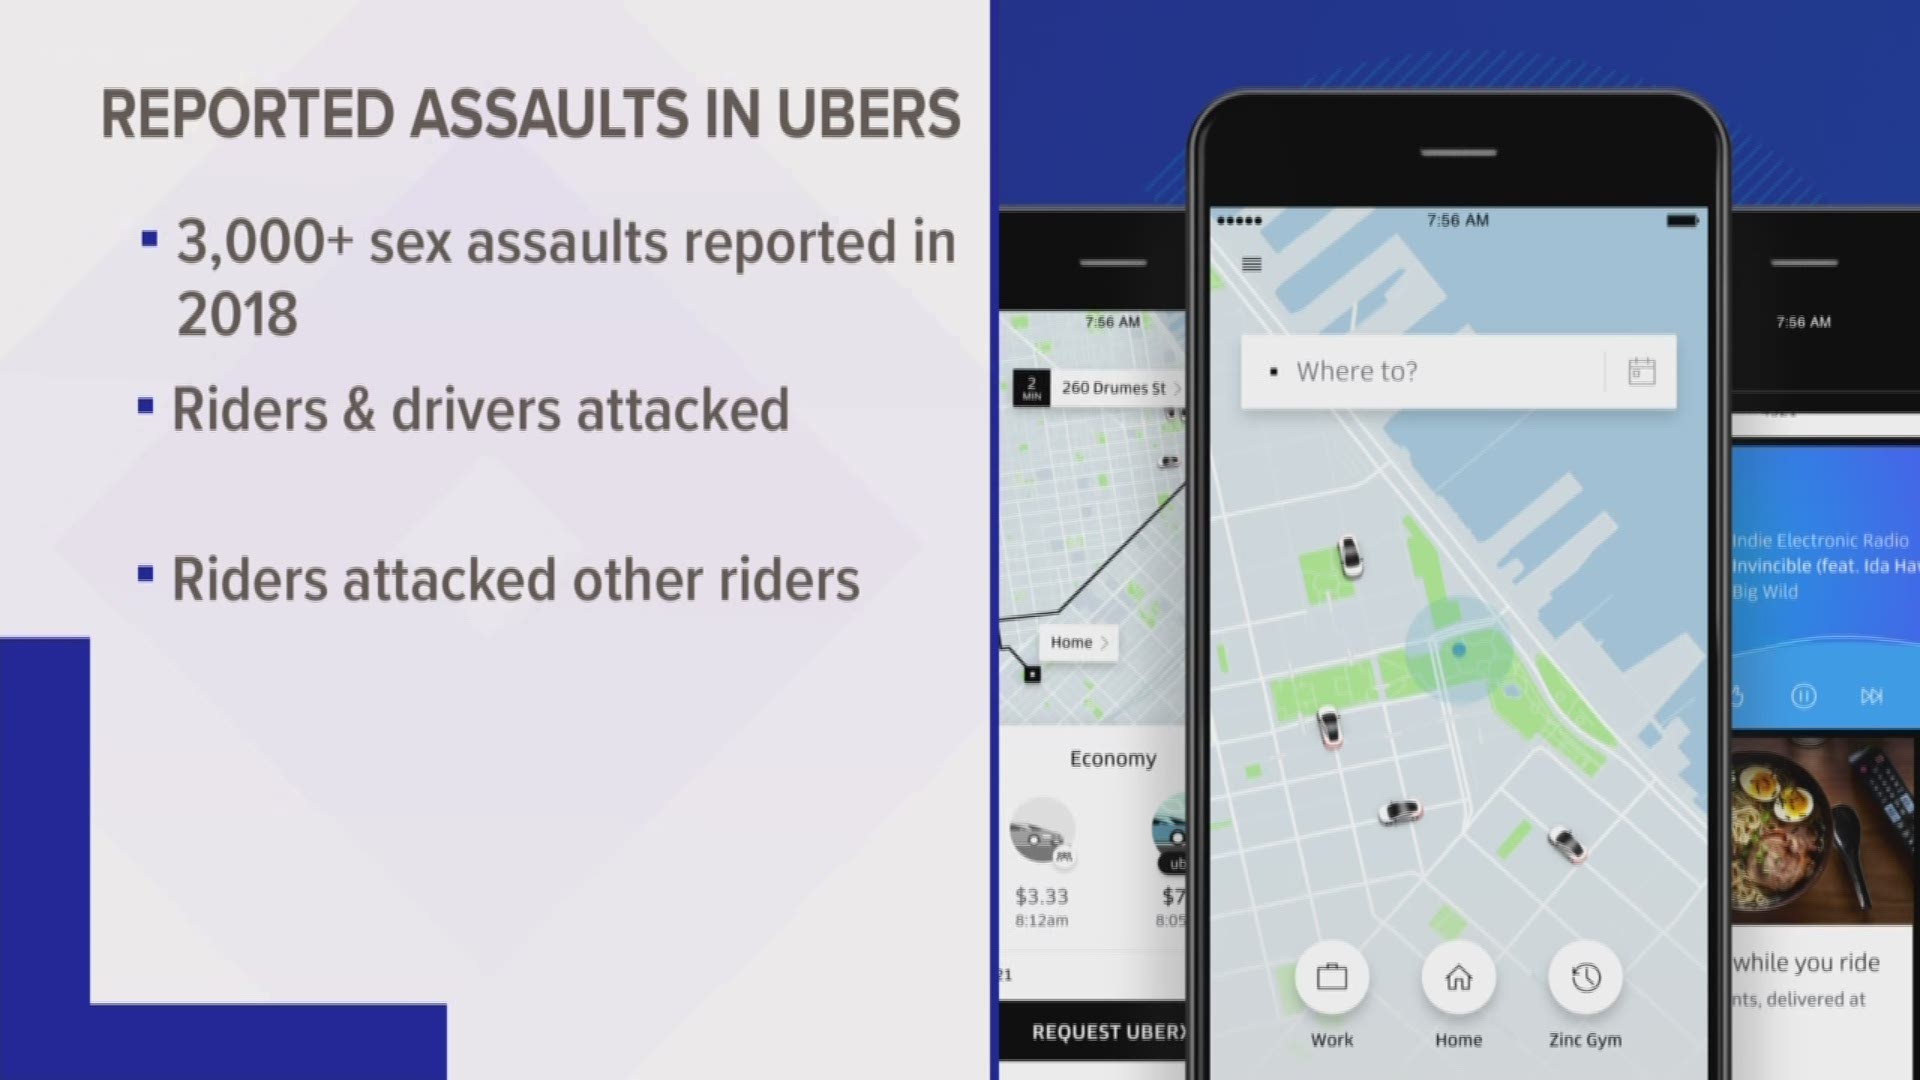 Uber riders reported more than 3,000 sexual assaults in 2018 kvue photo